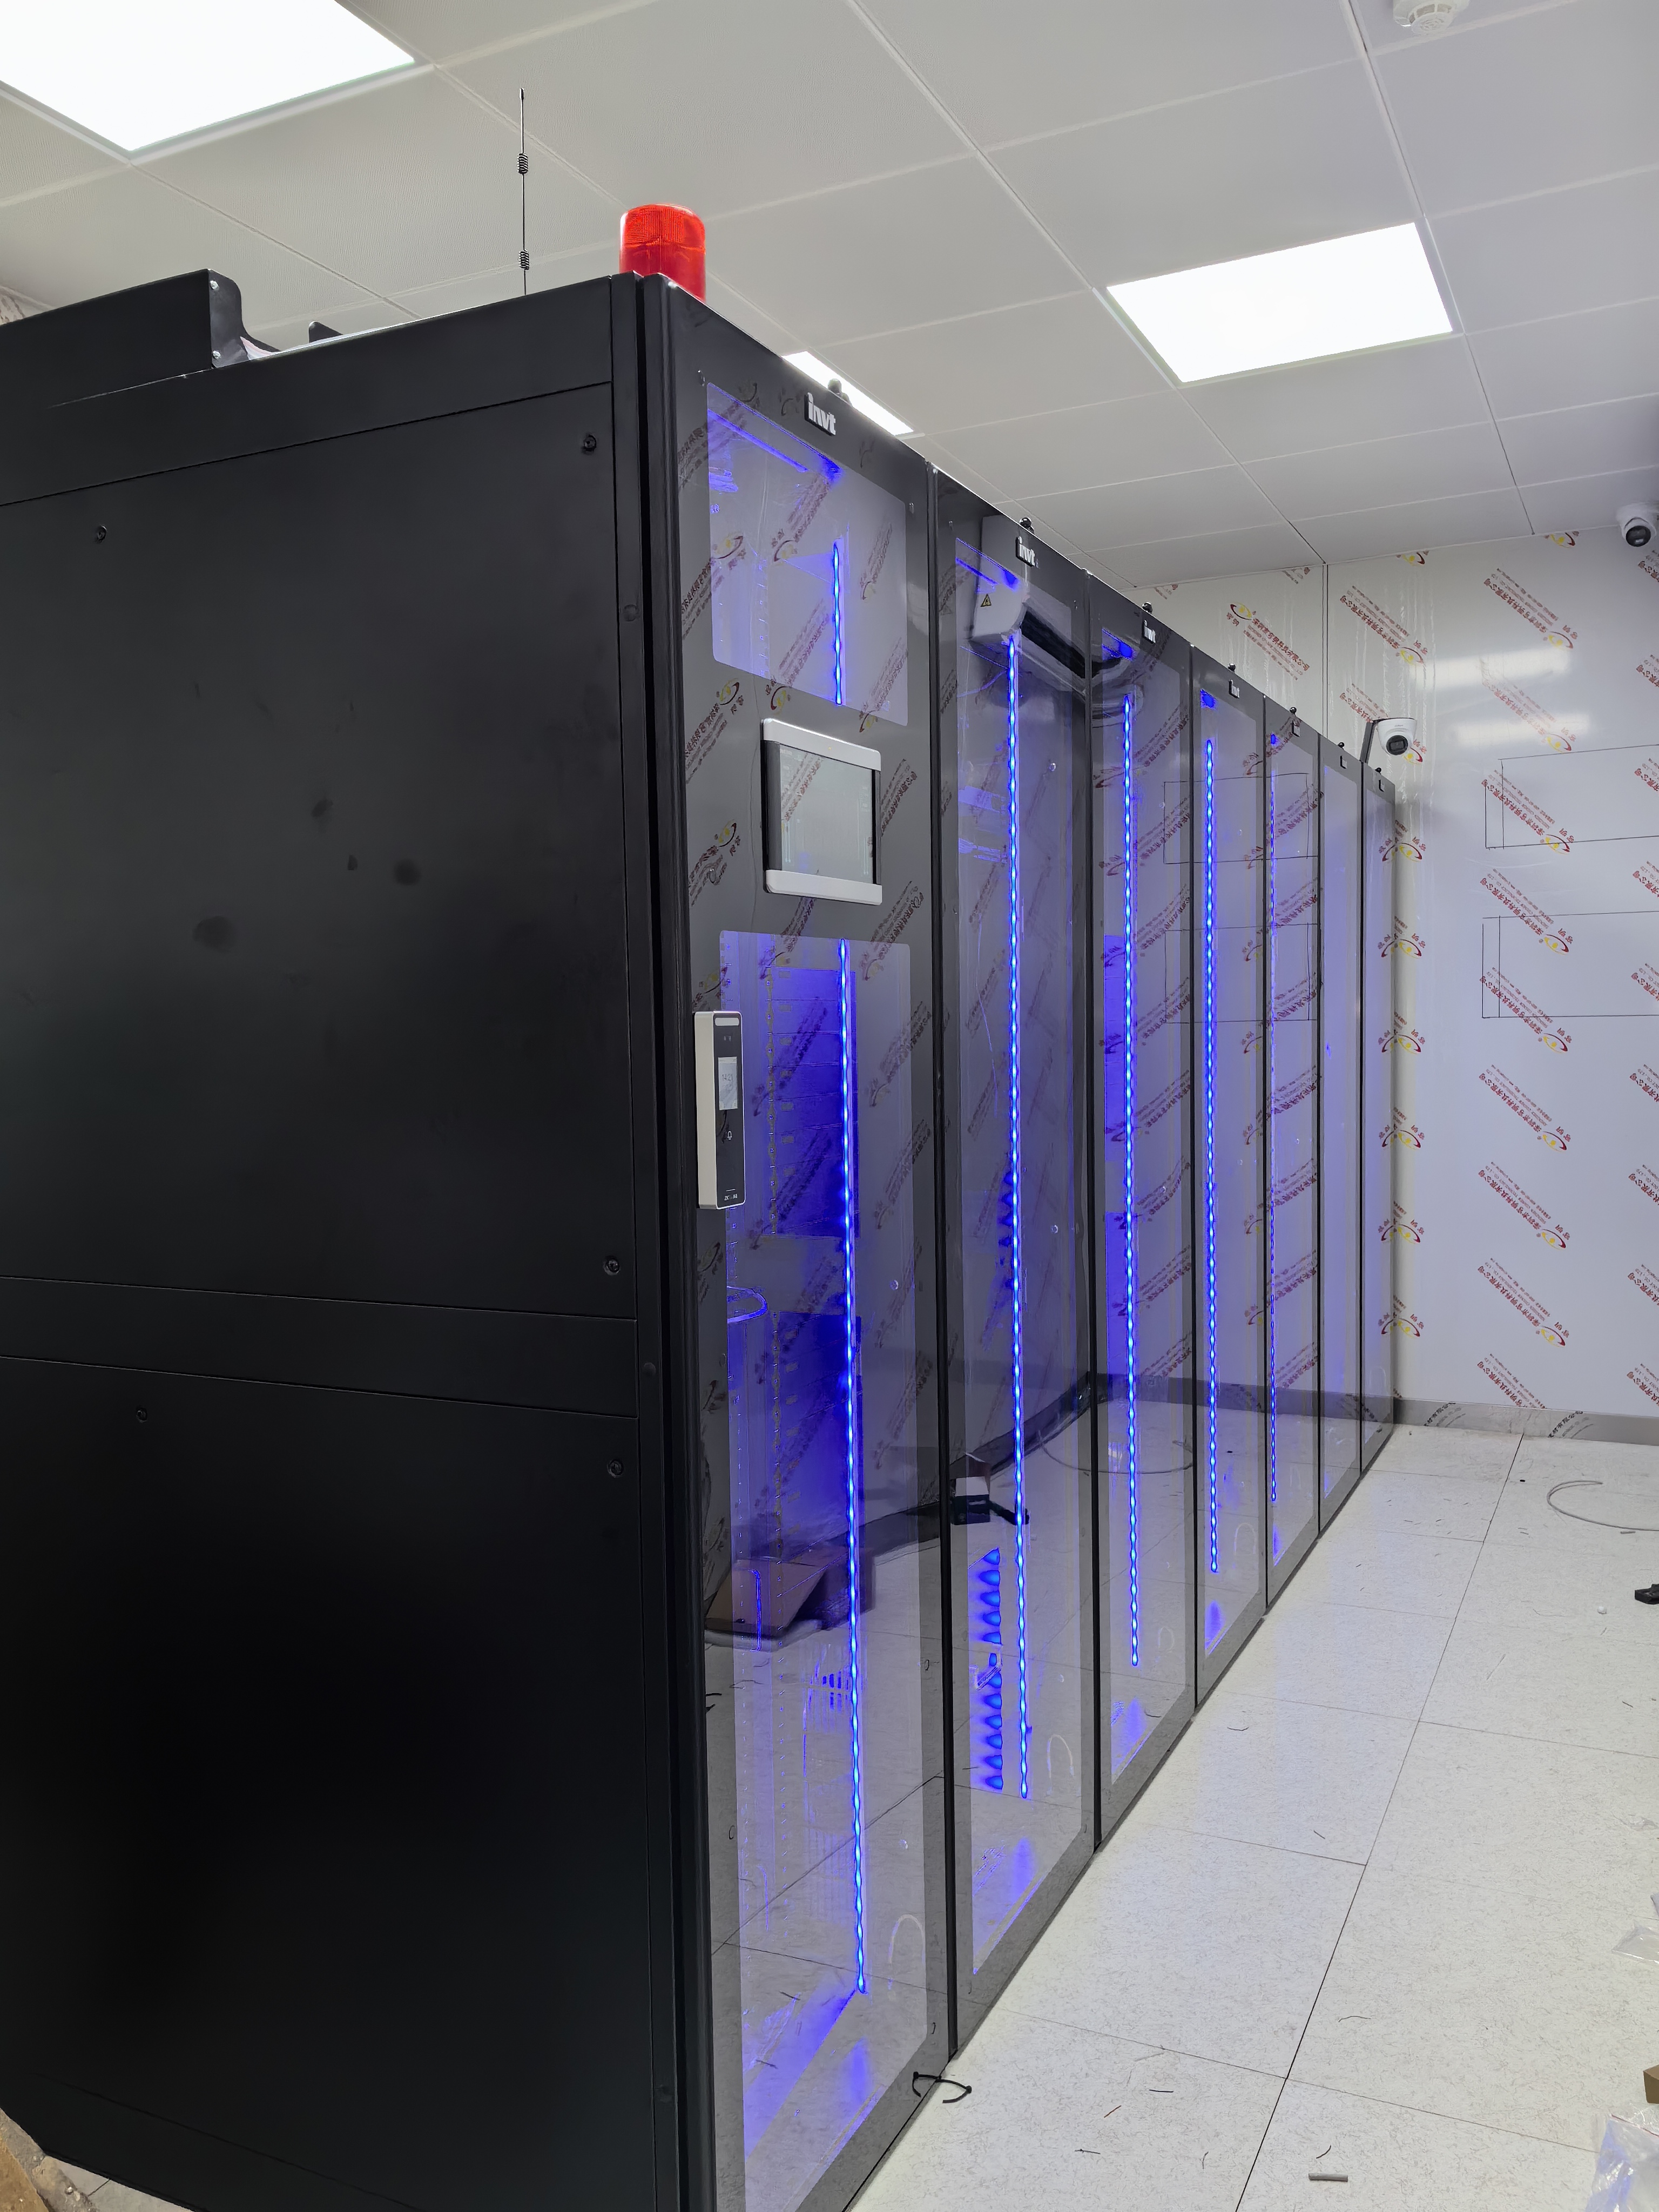 iWit Single Row Data Center Solution used in Jiangxi Disease Prevention Center project